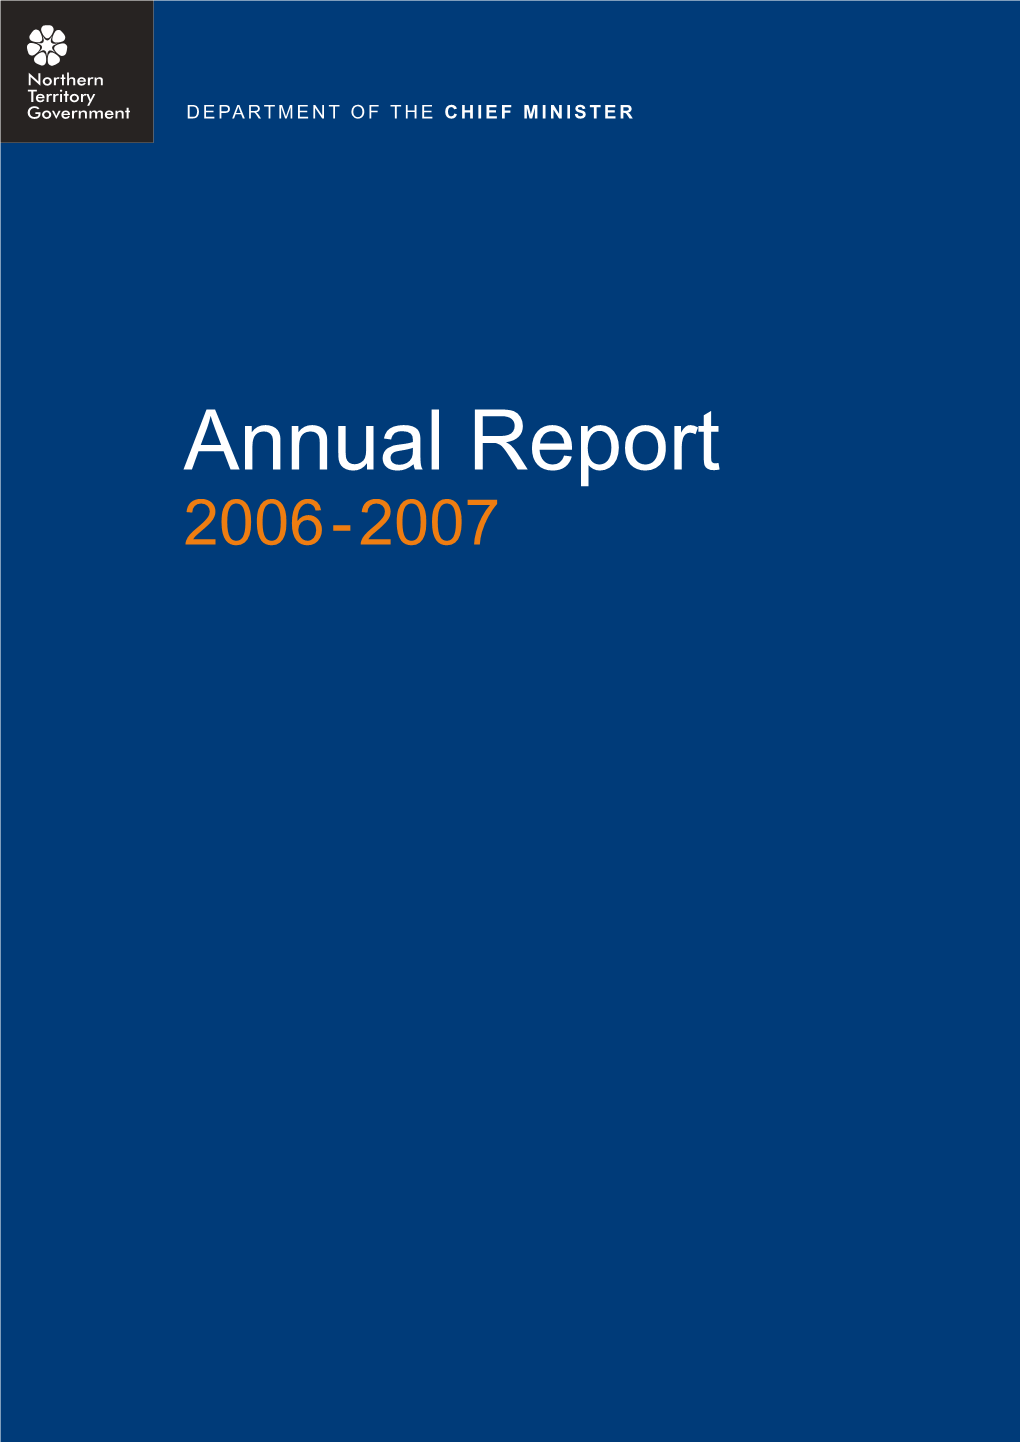 Annual Report 2006-2007 DEPARTMENT of the CHIEF MINISTER